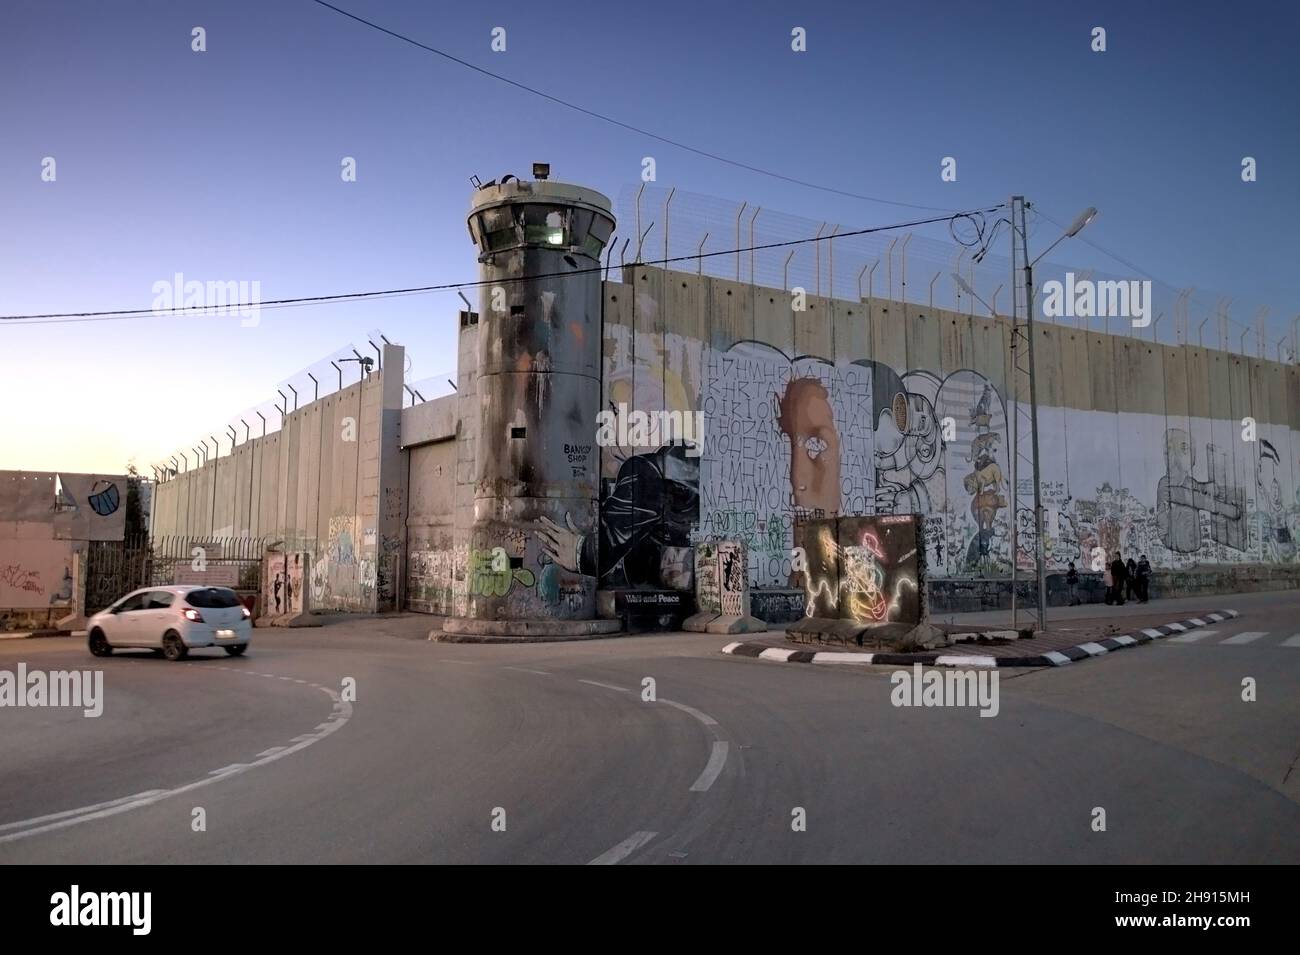 Israeli separation wall in the West Bank. Stock Photo